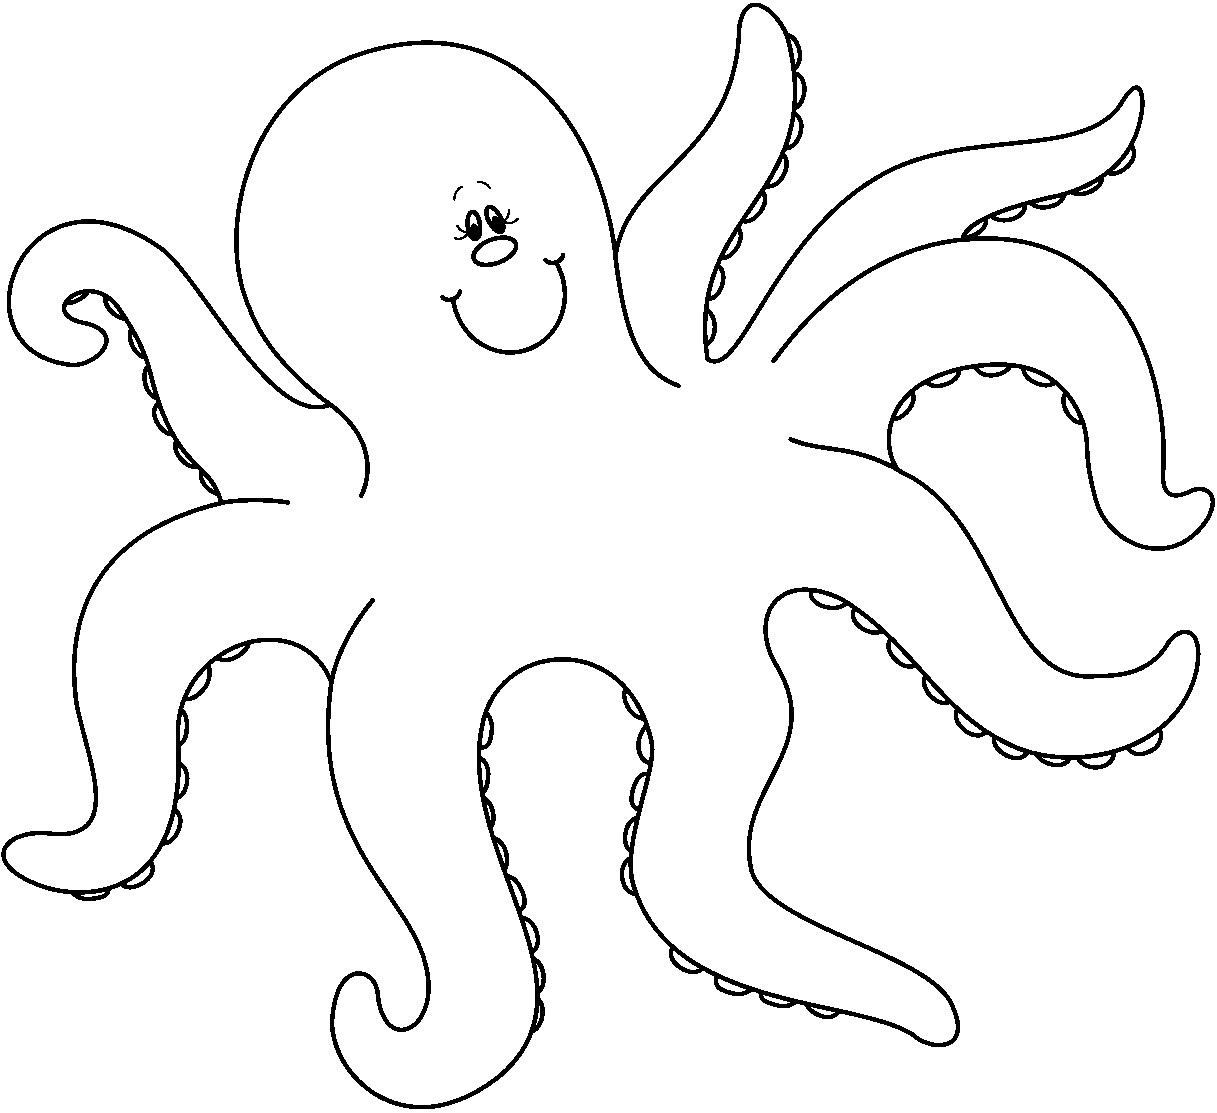 Octopus Outline Coloring Pages octopus black jpg Printable Coloring4free